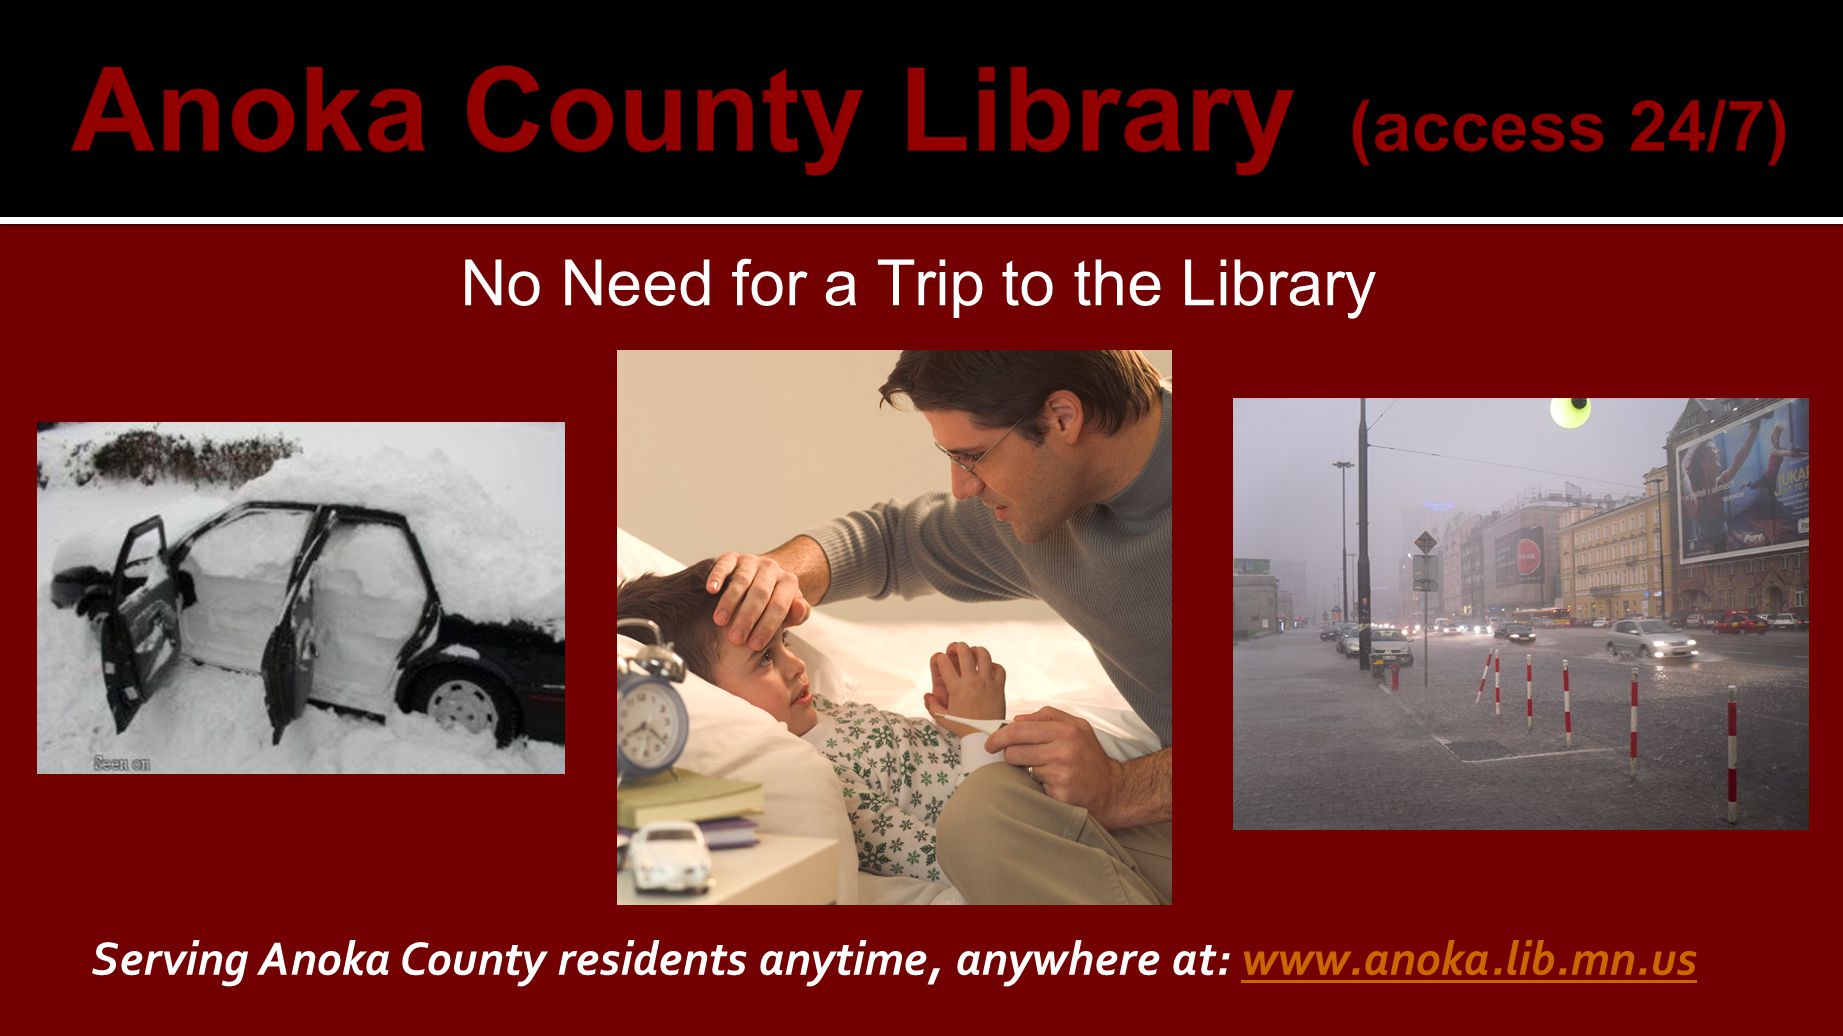 No Need for a Trip to the Library Serving Anoka County residents anytime, anywhere at: